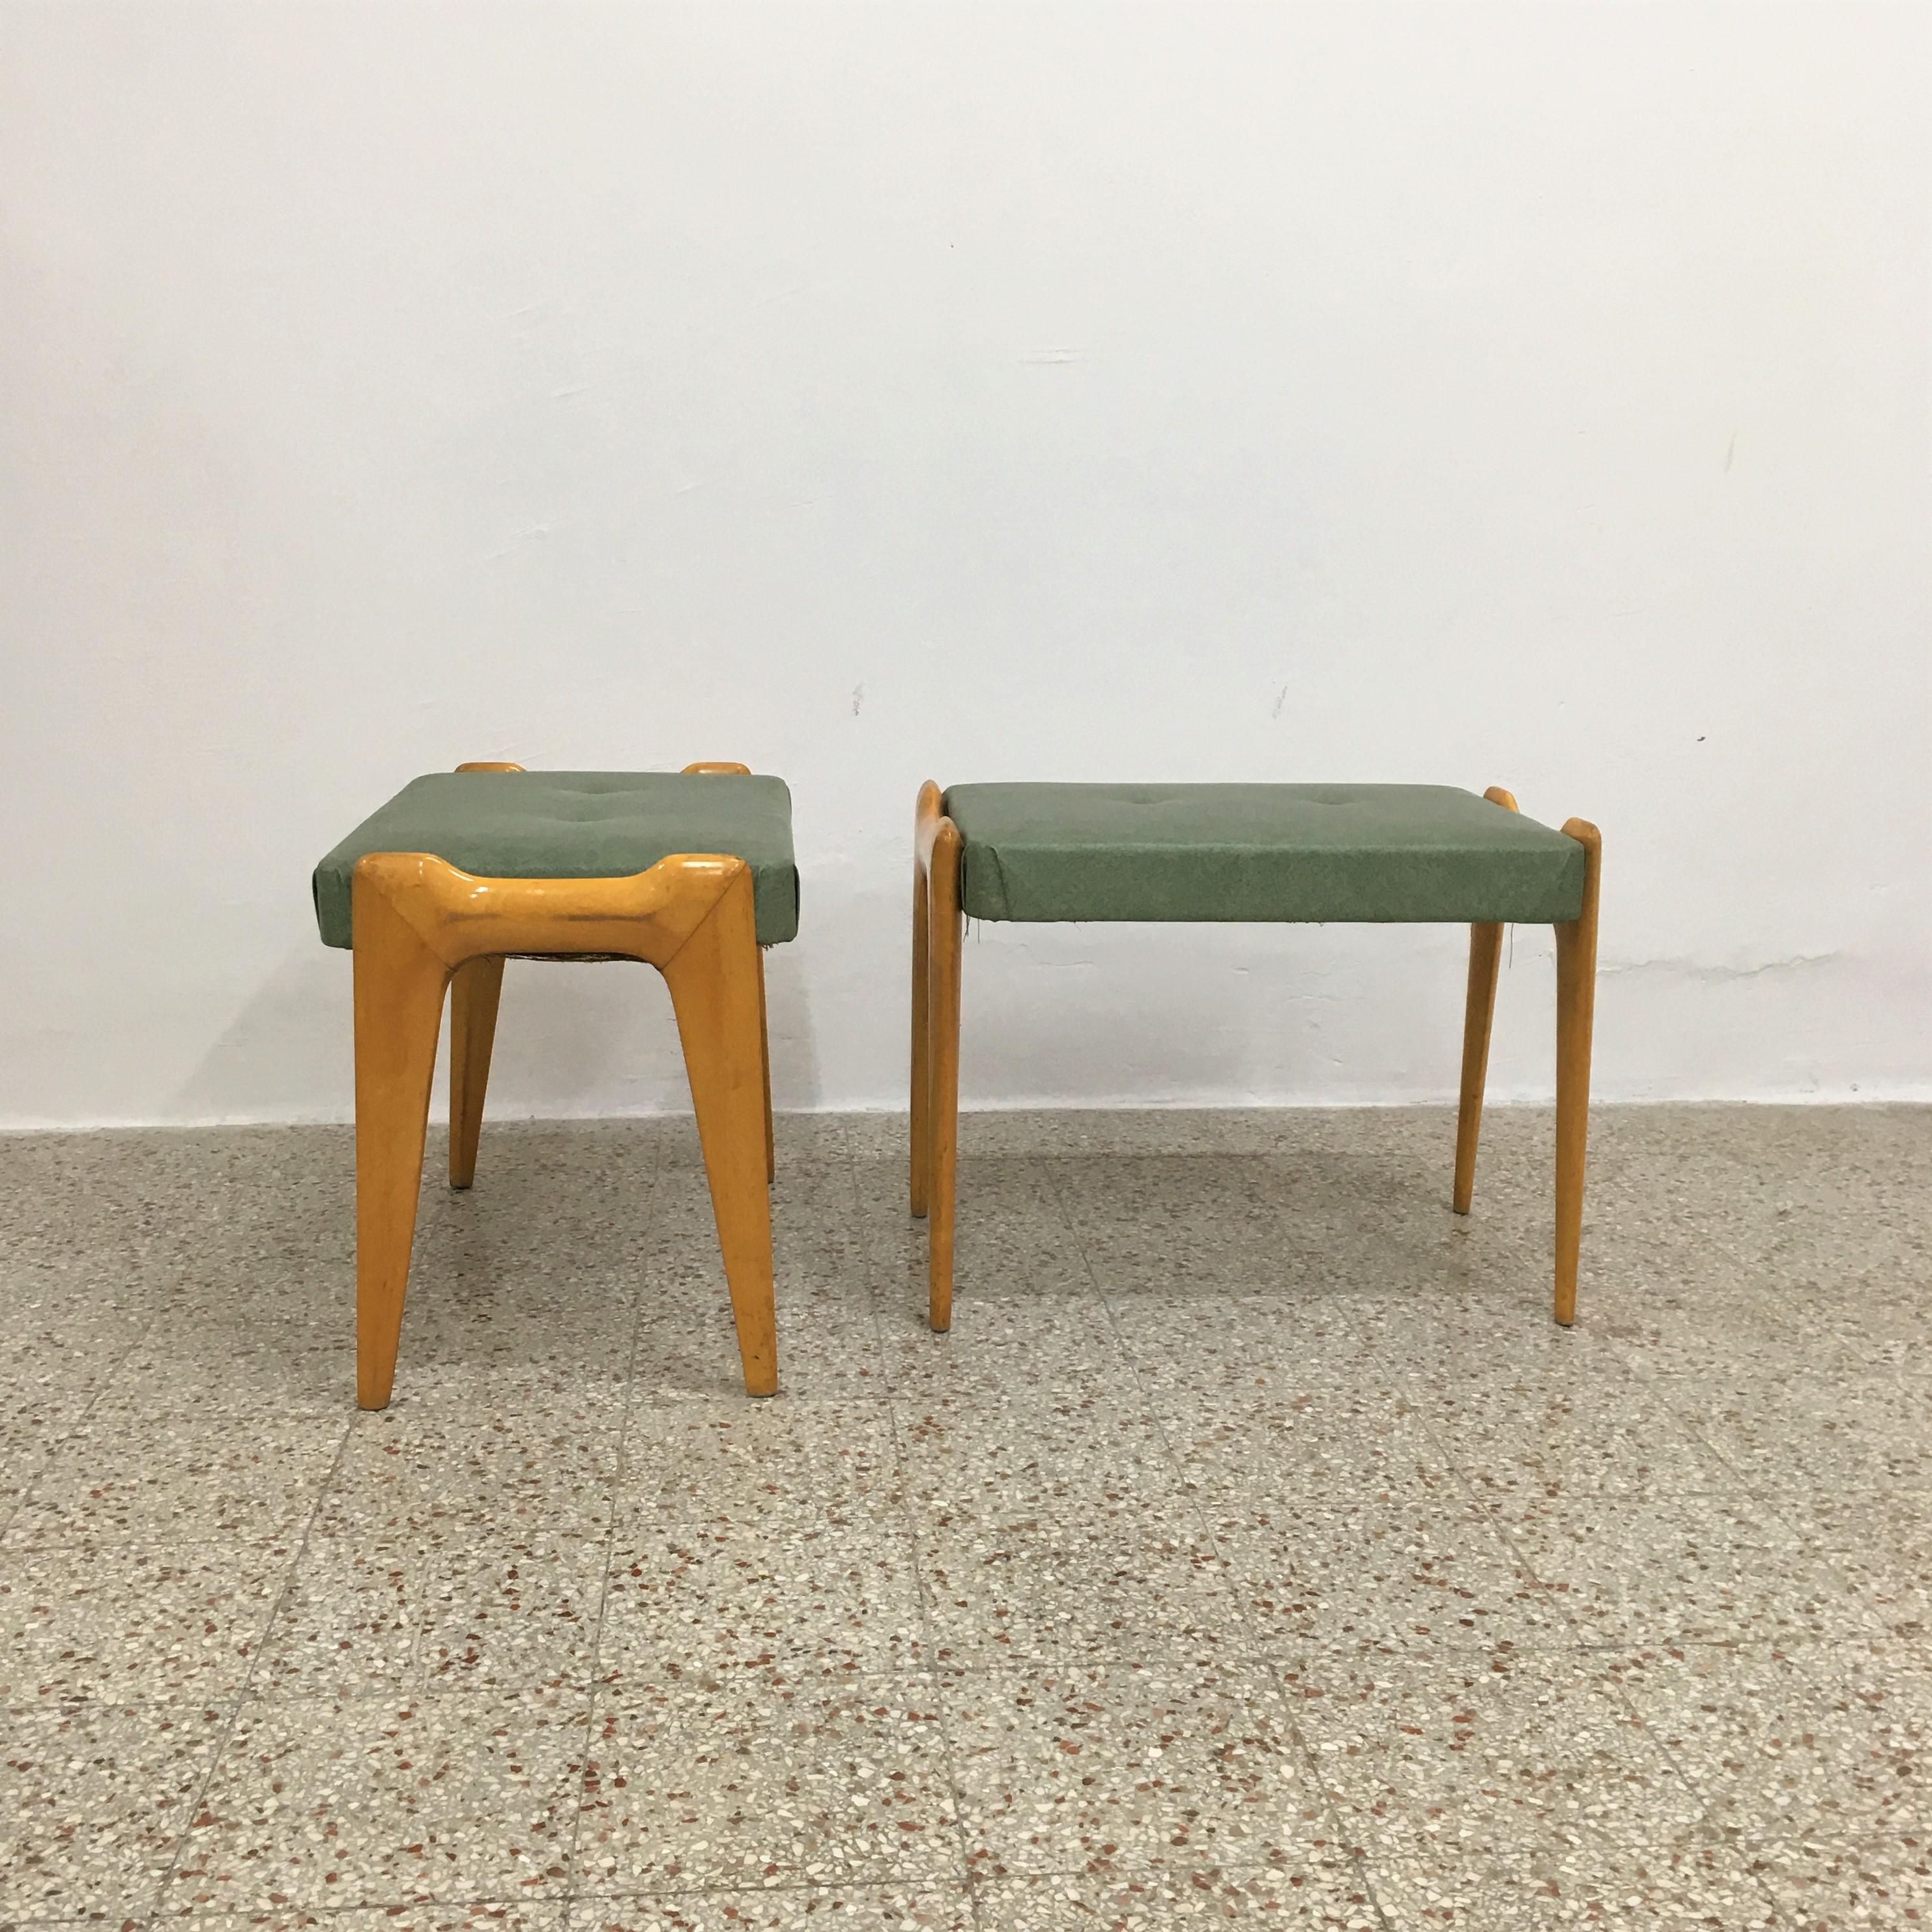 Modern Ico Parisi Vintage Stools in Light Wood and Skai Set of 2 50s Cantù Italy